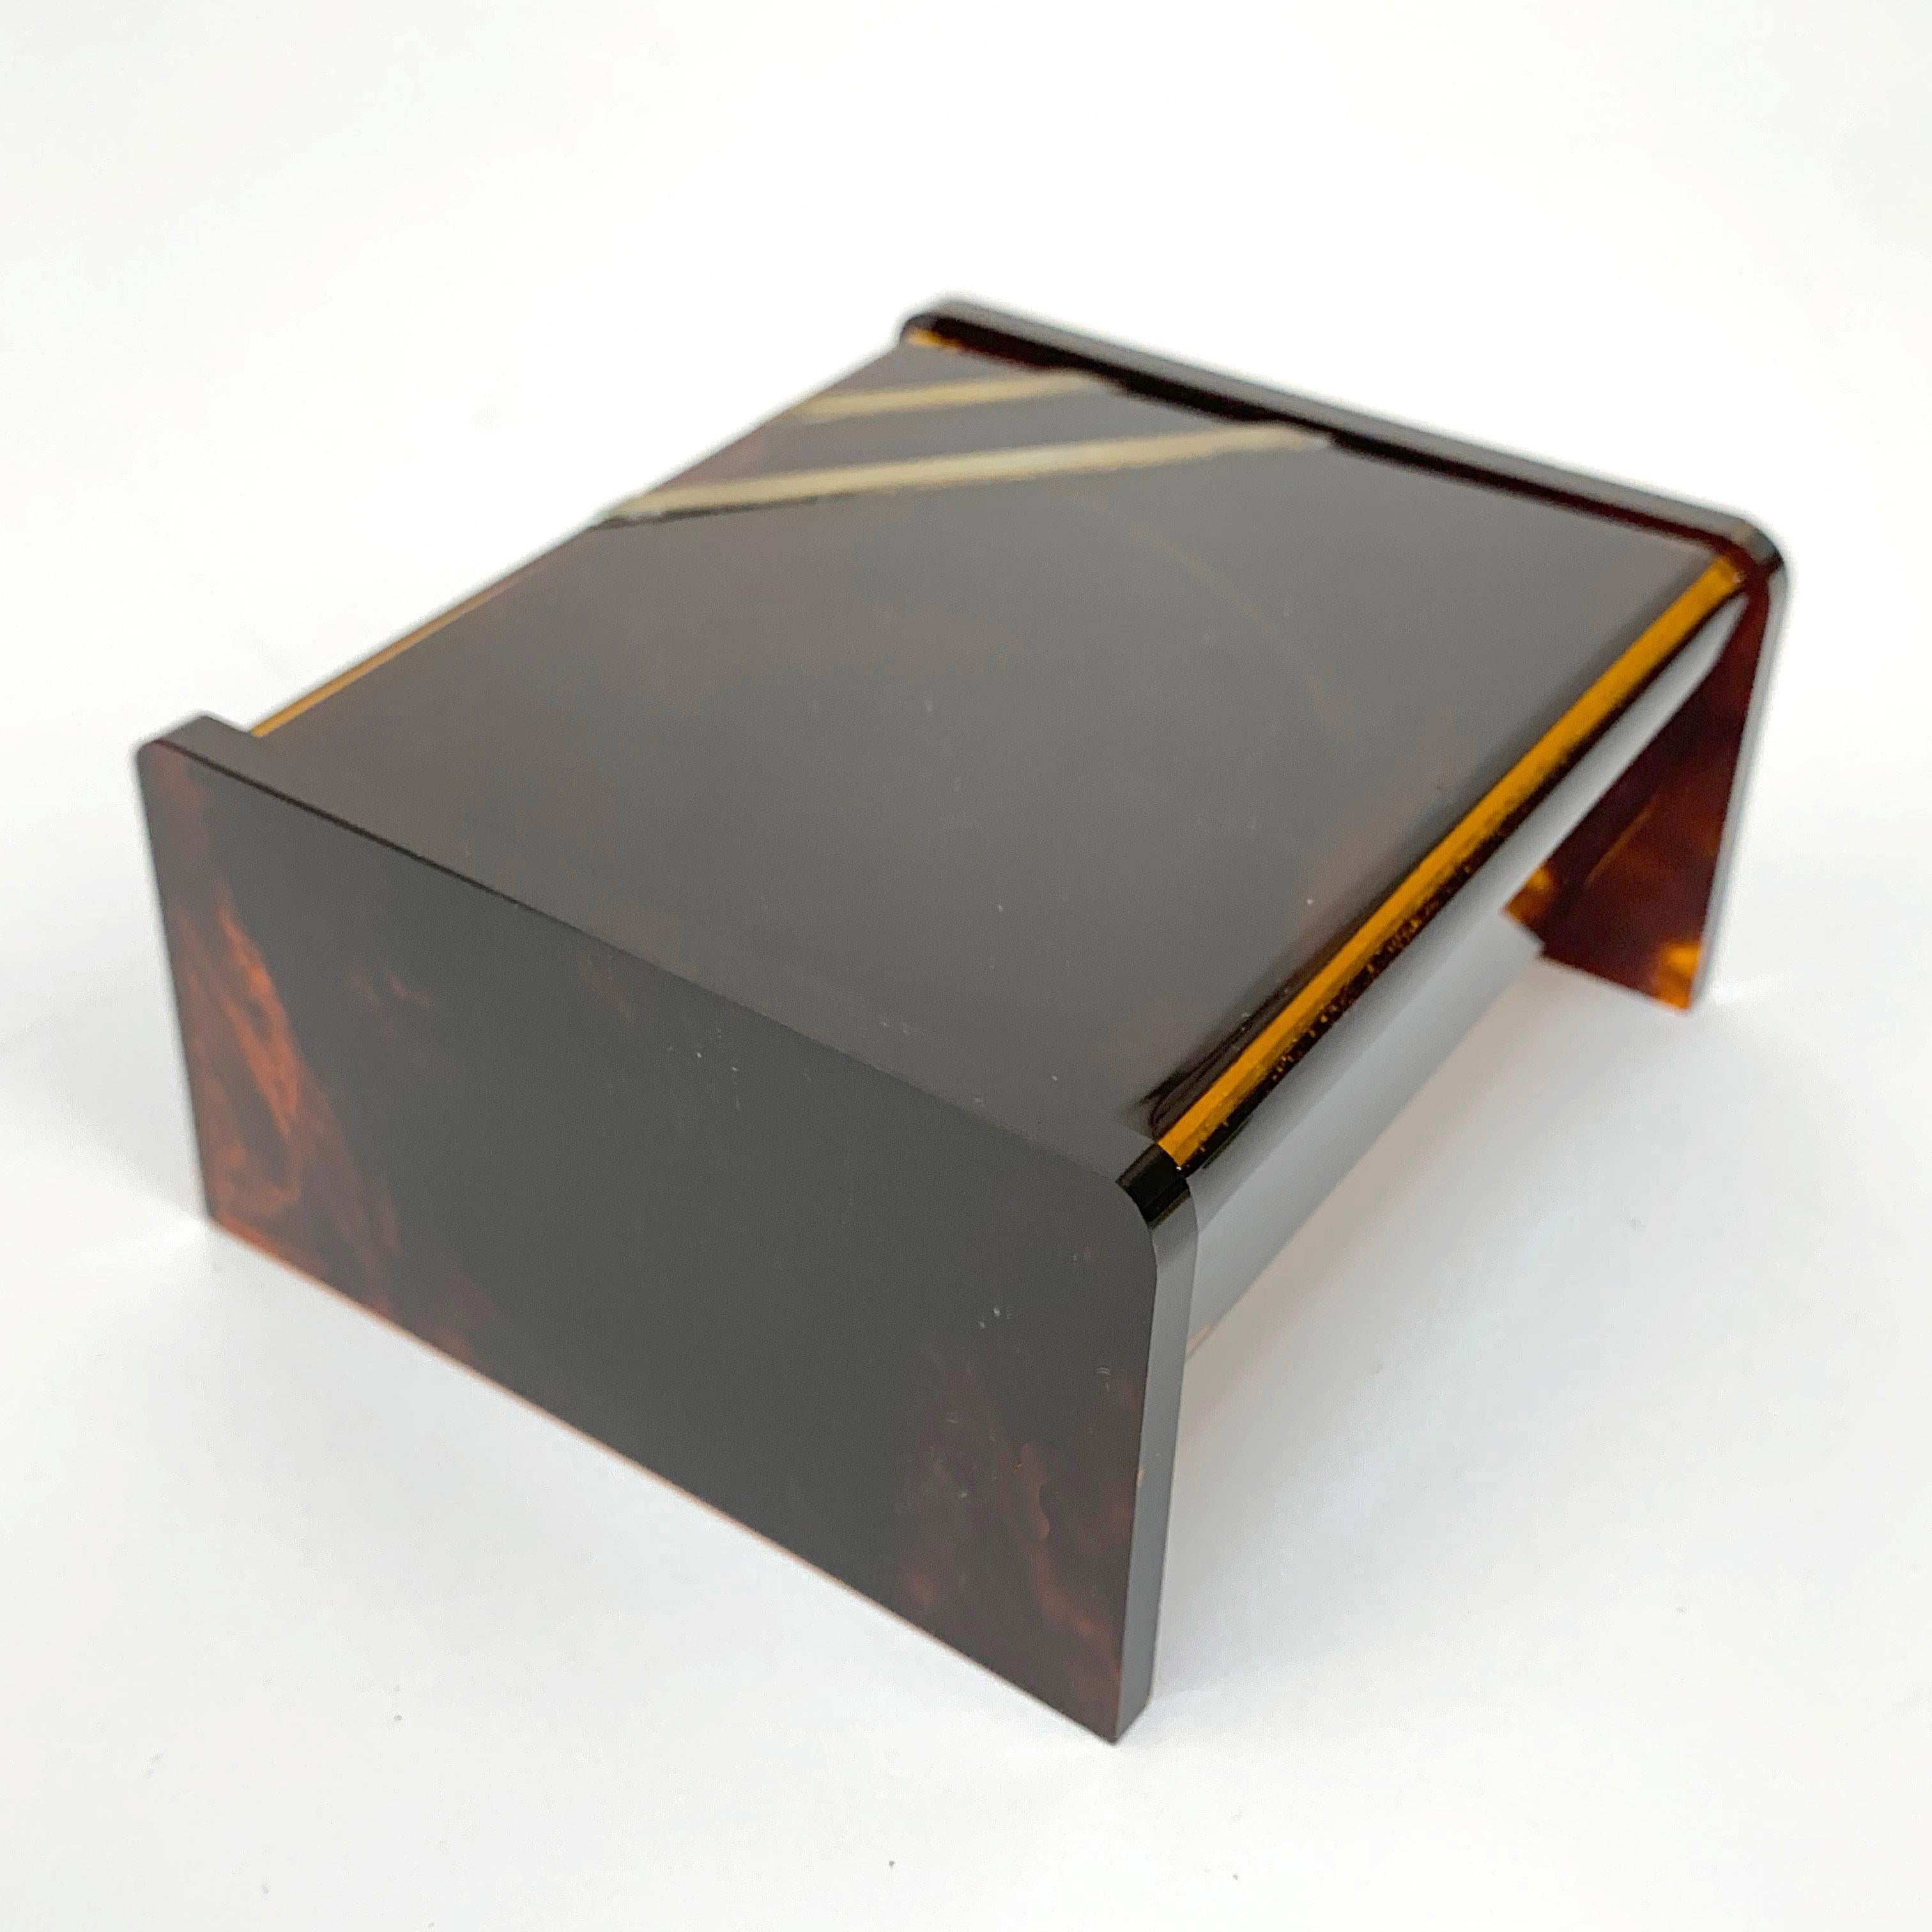 Midcentury Lucite, Tortoise Plexiglass and Brass Christian Dior Jewelry Box 1970 For Sale 6